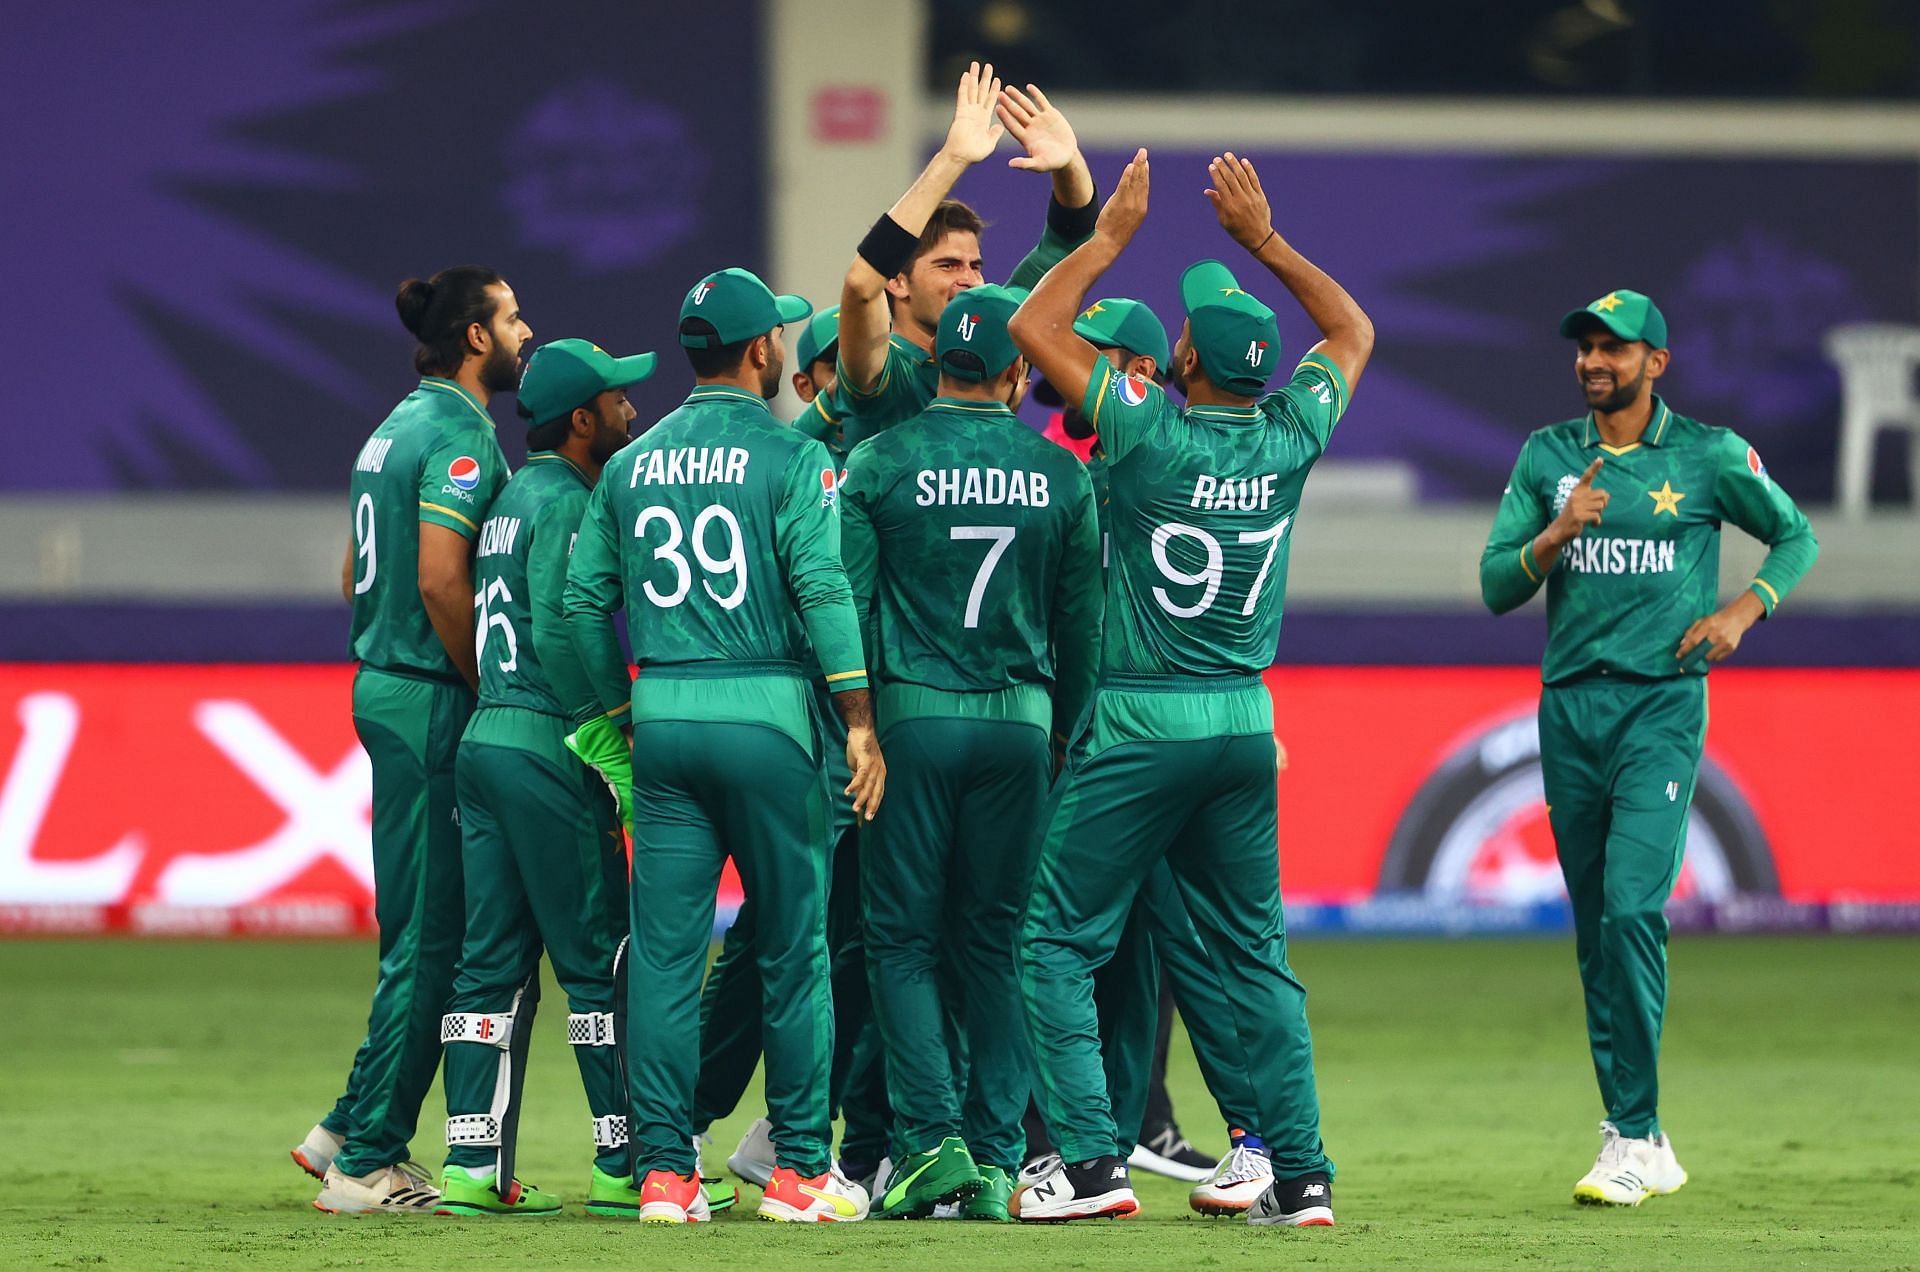 Can the Men in Green win the Pakistan vs New Zealand match?